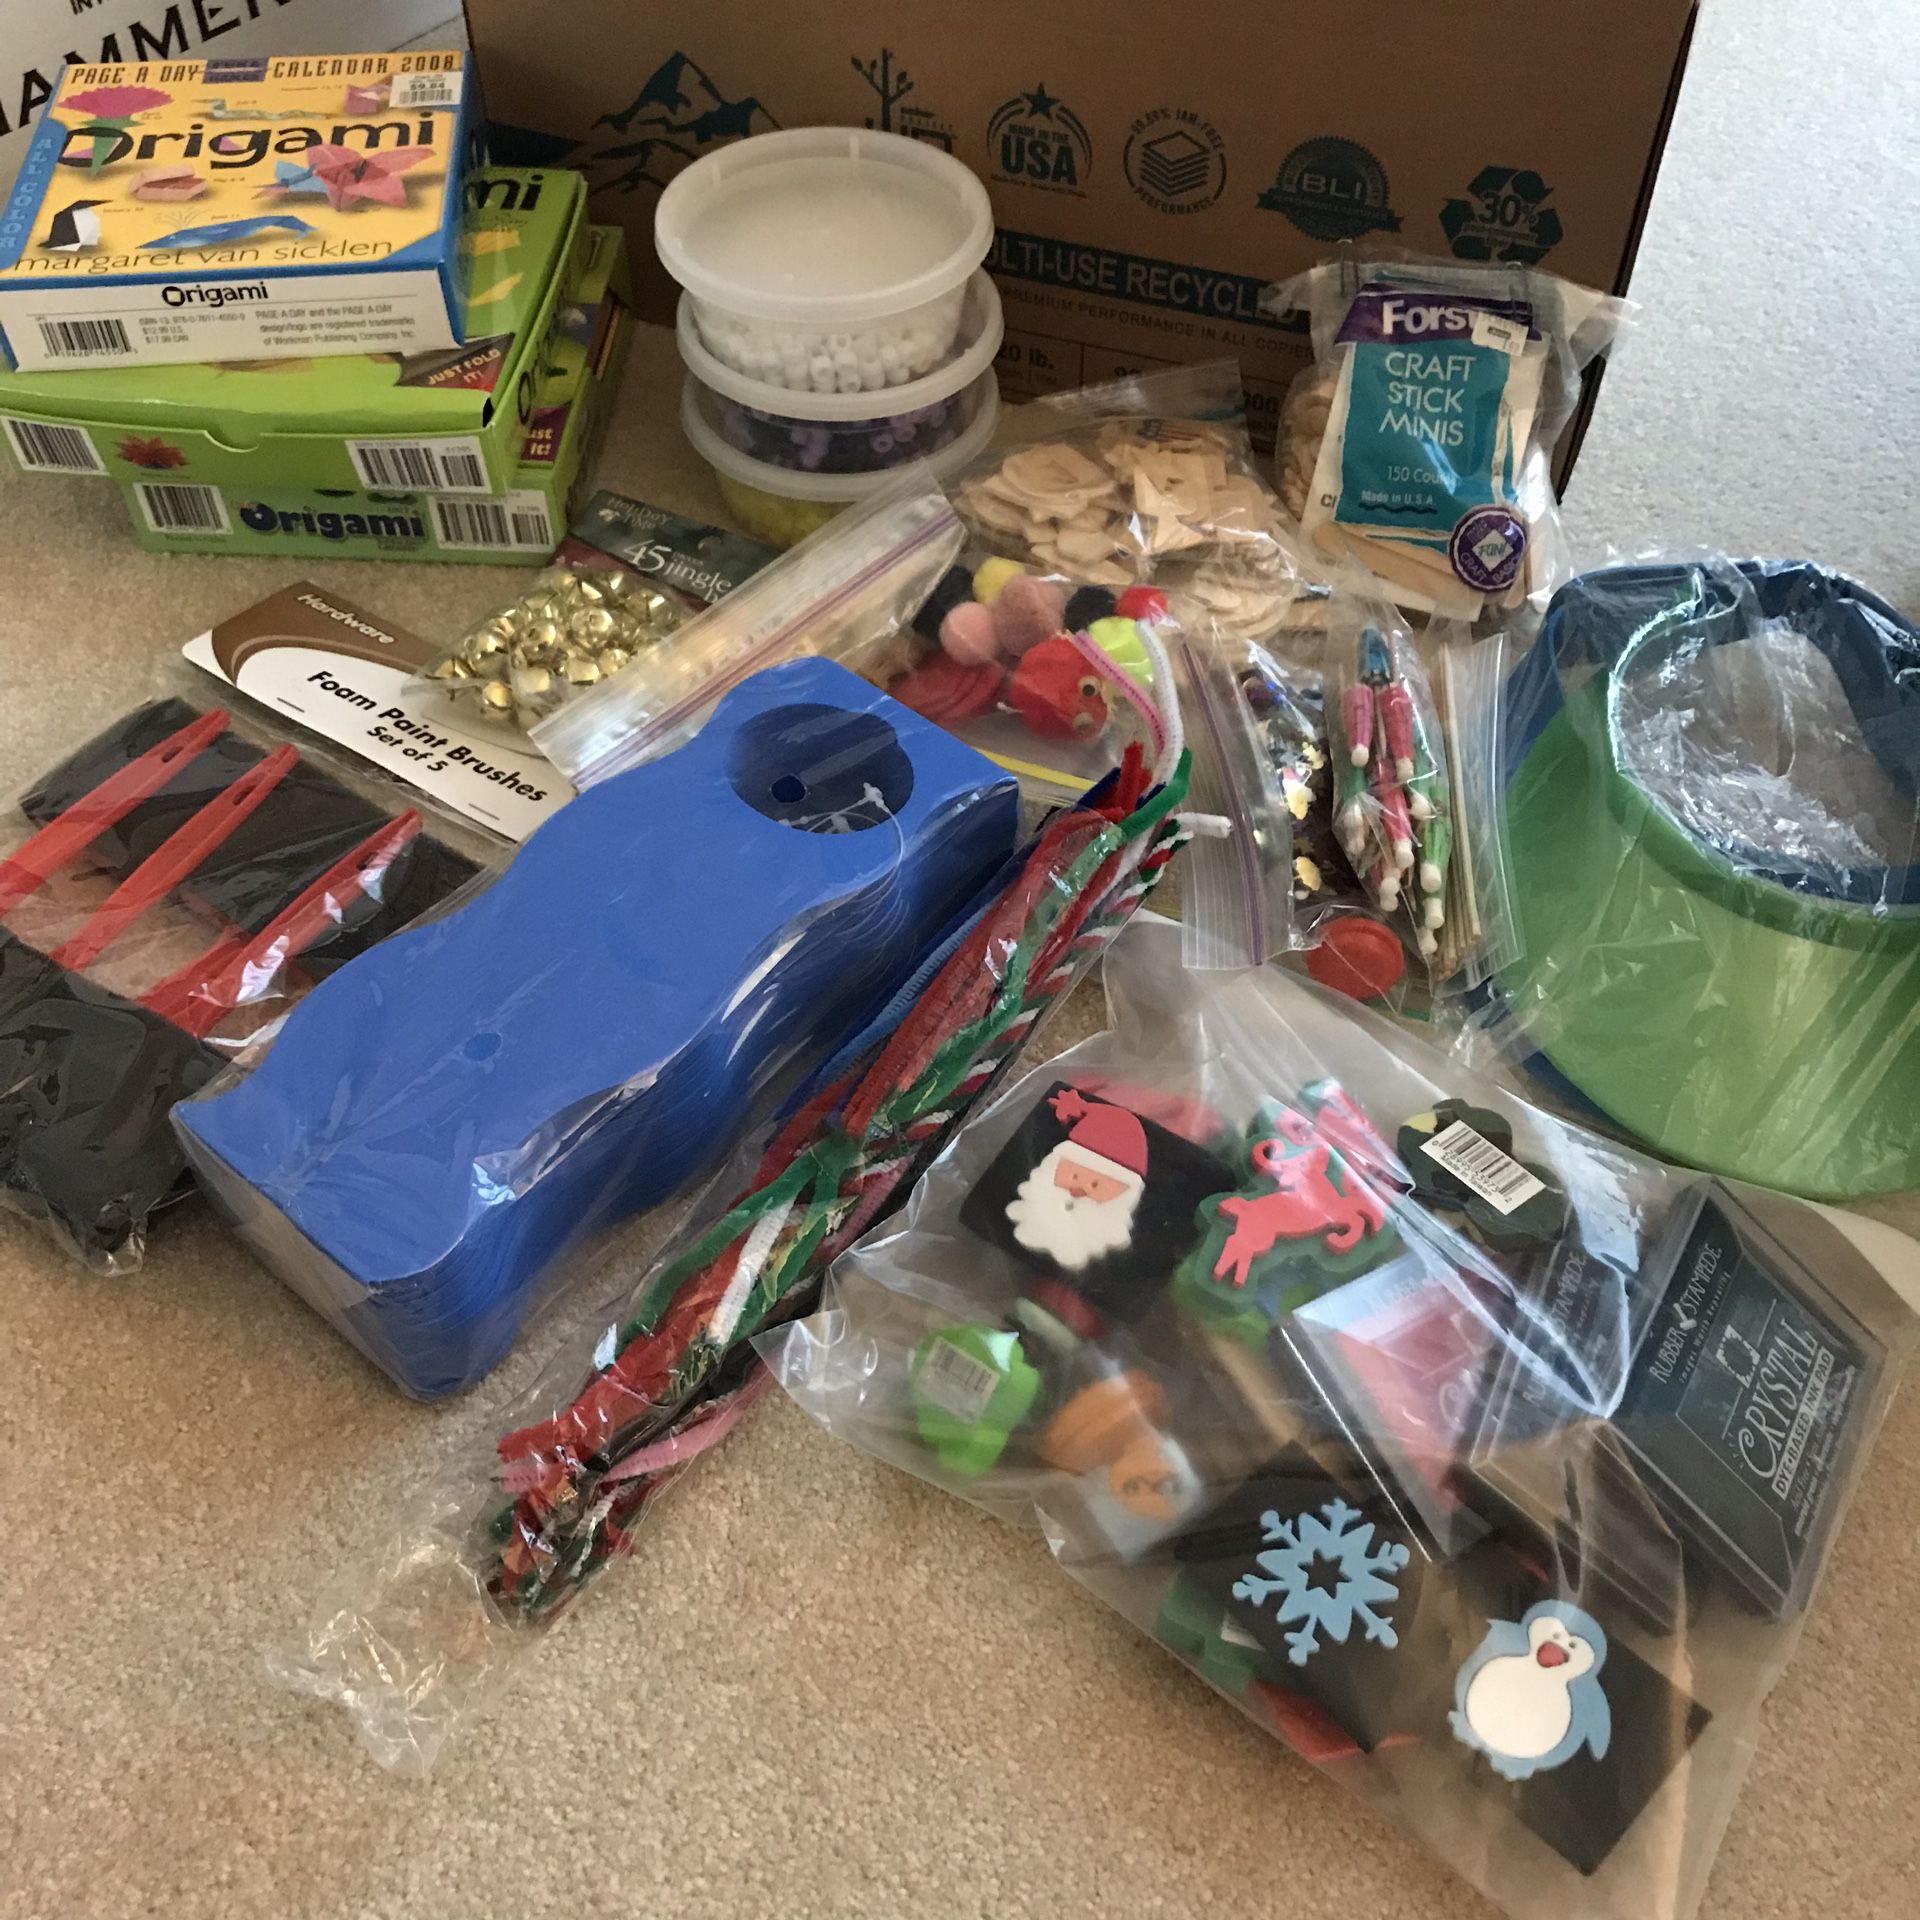 Big box of arts and crafts supplies like new